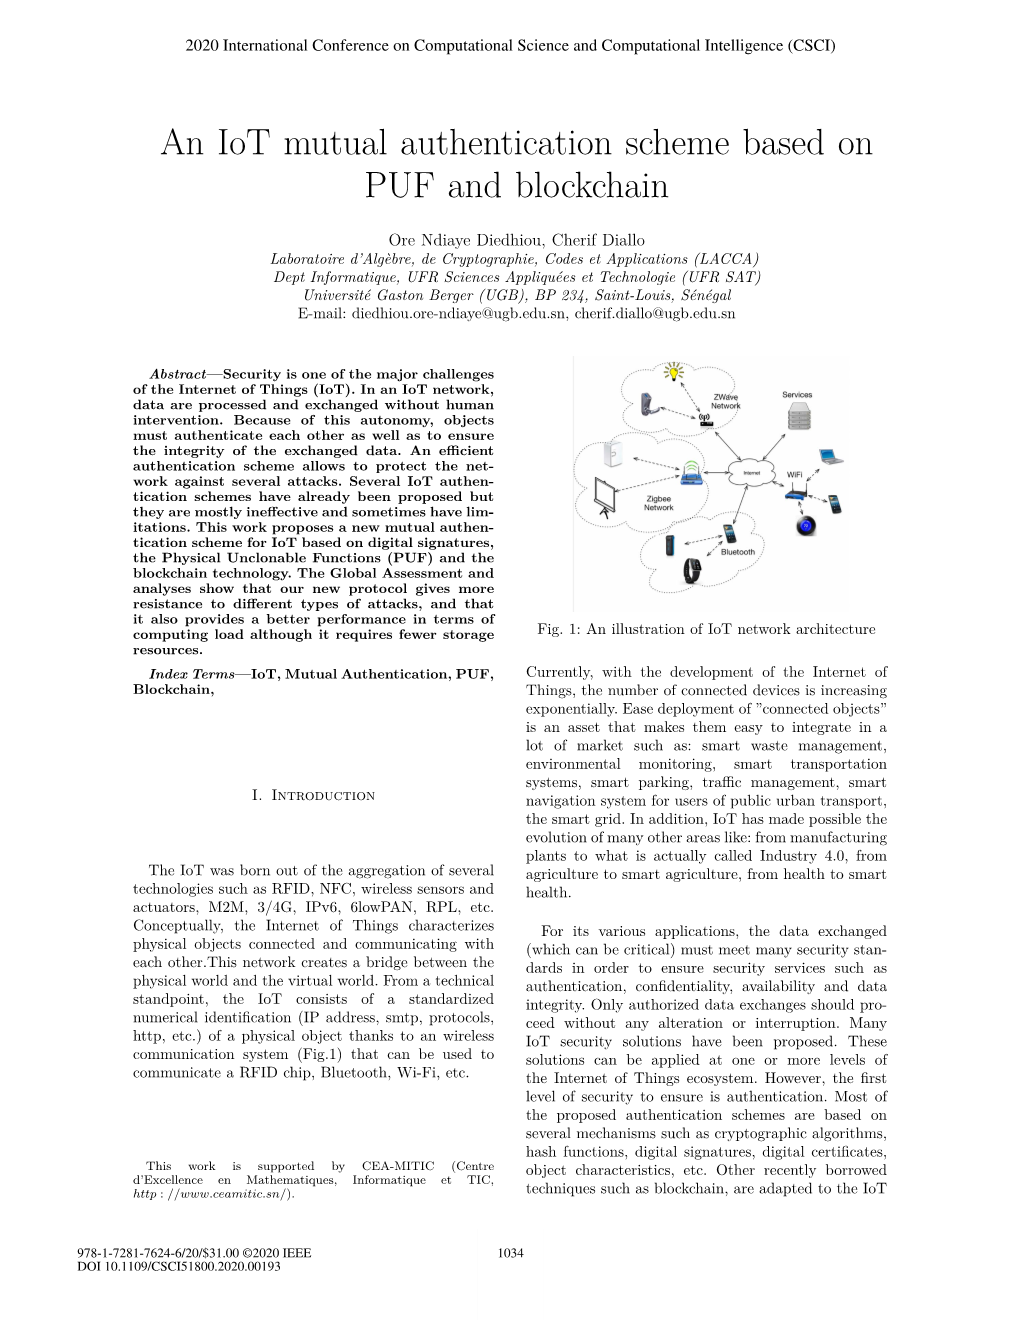 An Iot Mutual Authentication Scheme Based on PUF and Blockchain